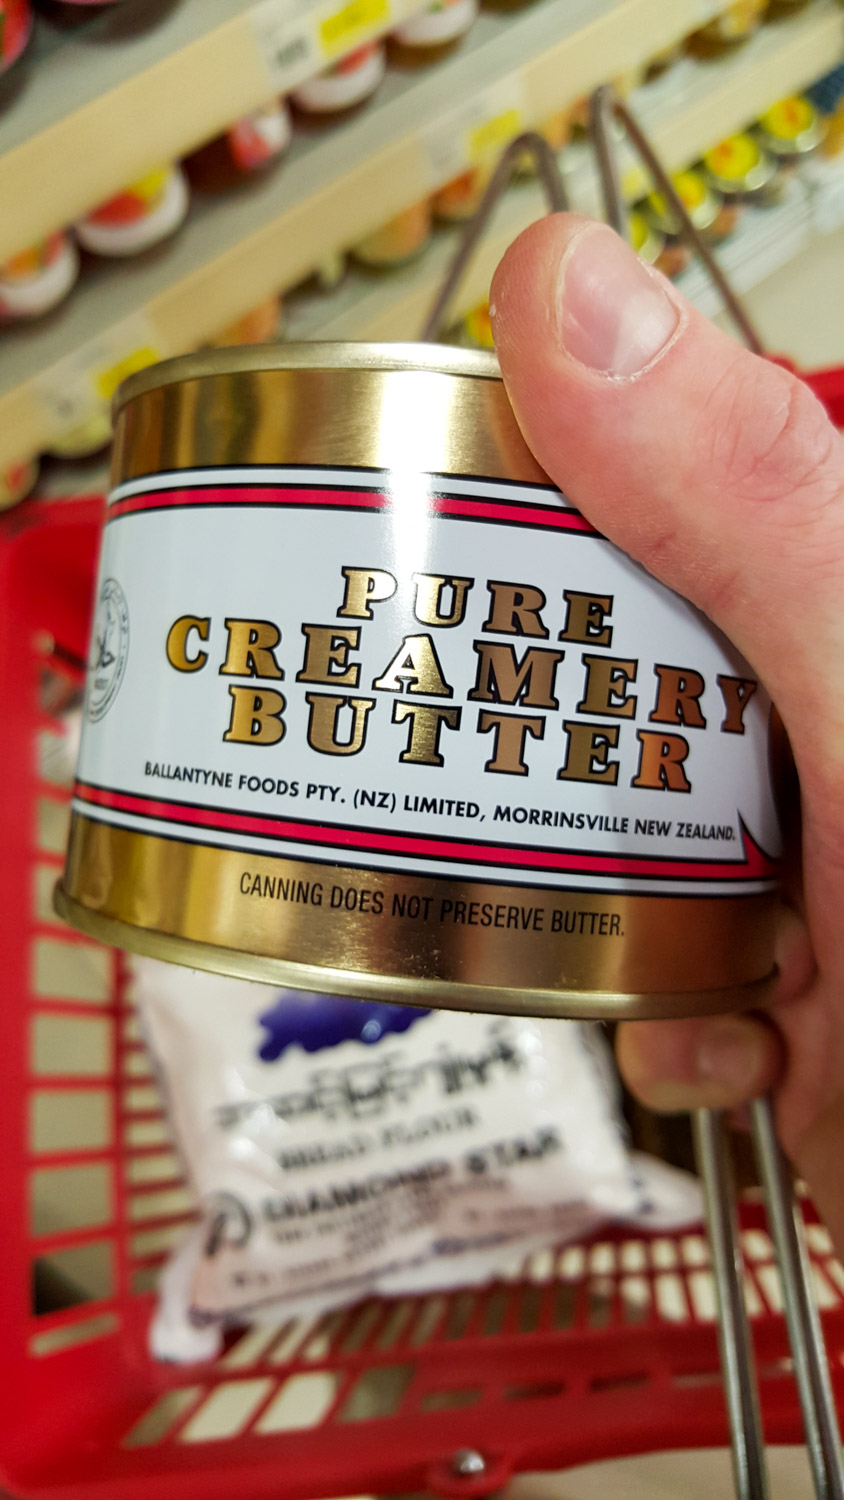 I was just about to buy this butter. Until I was told that "canning does not preserve butter".